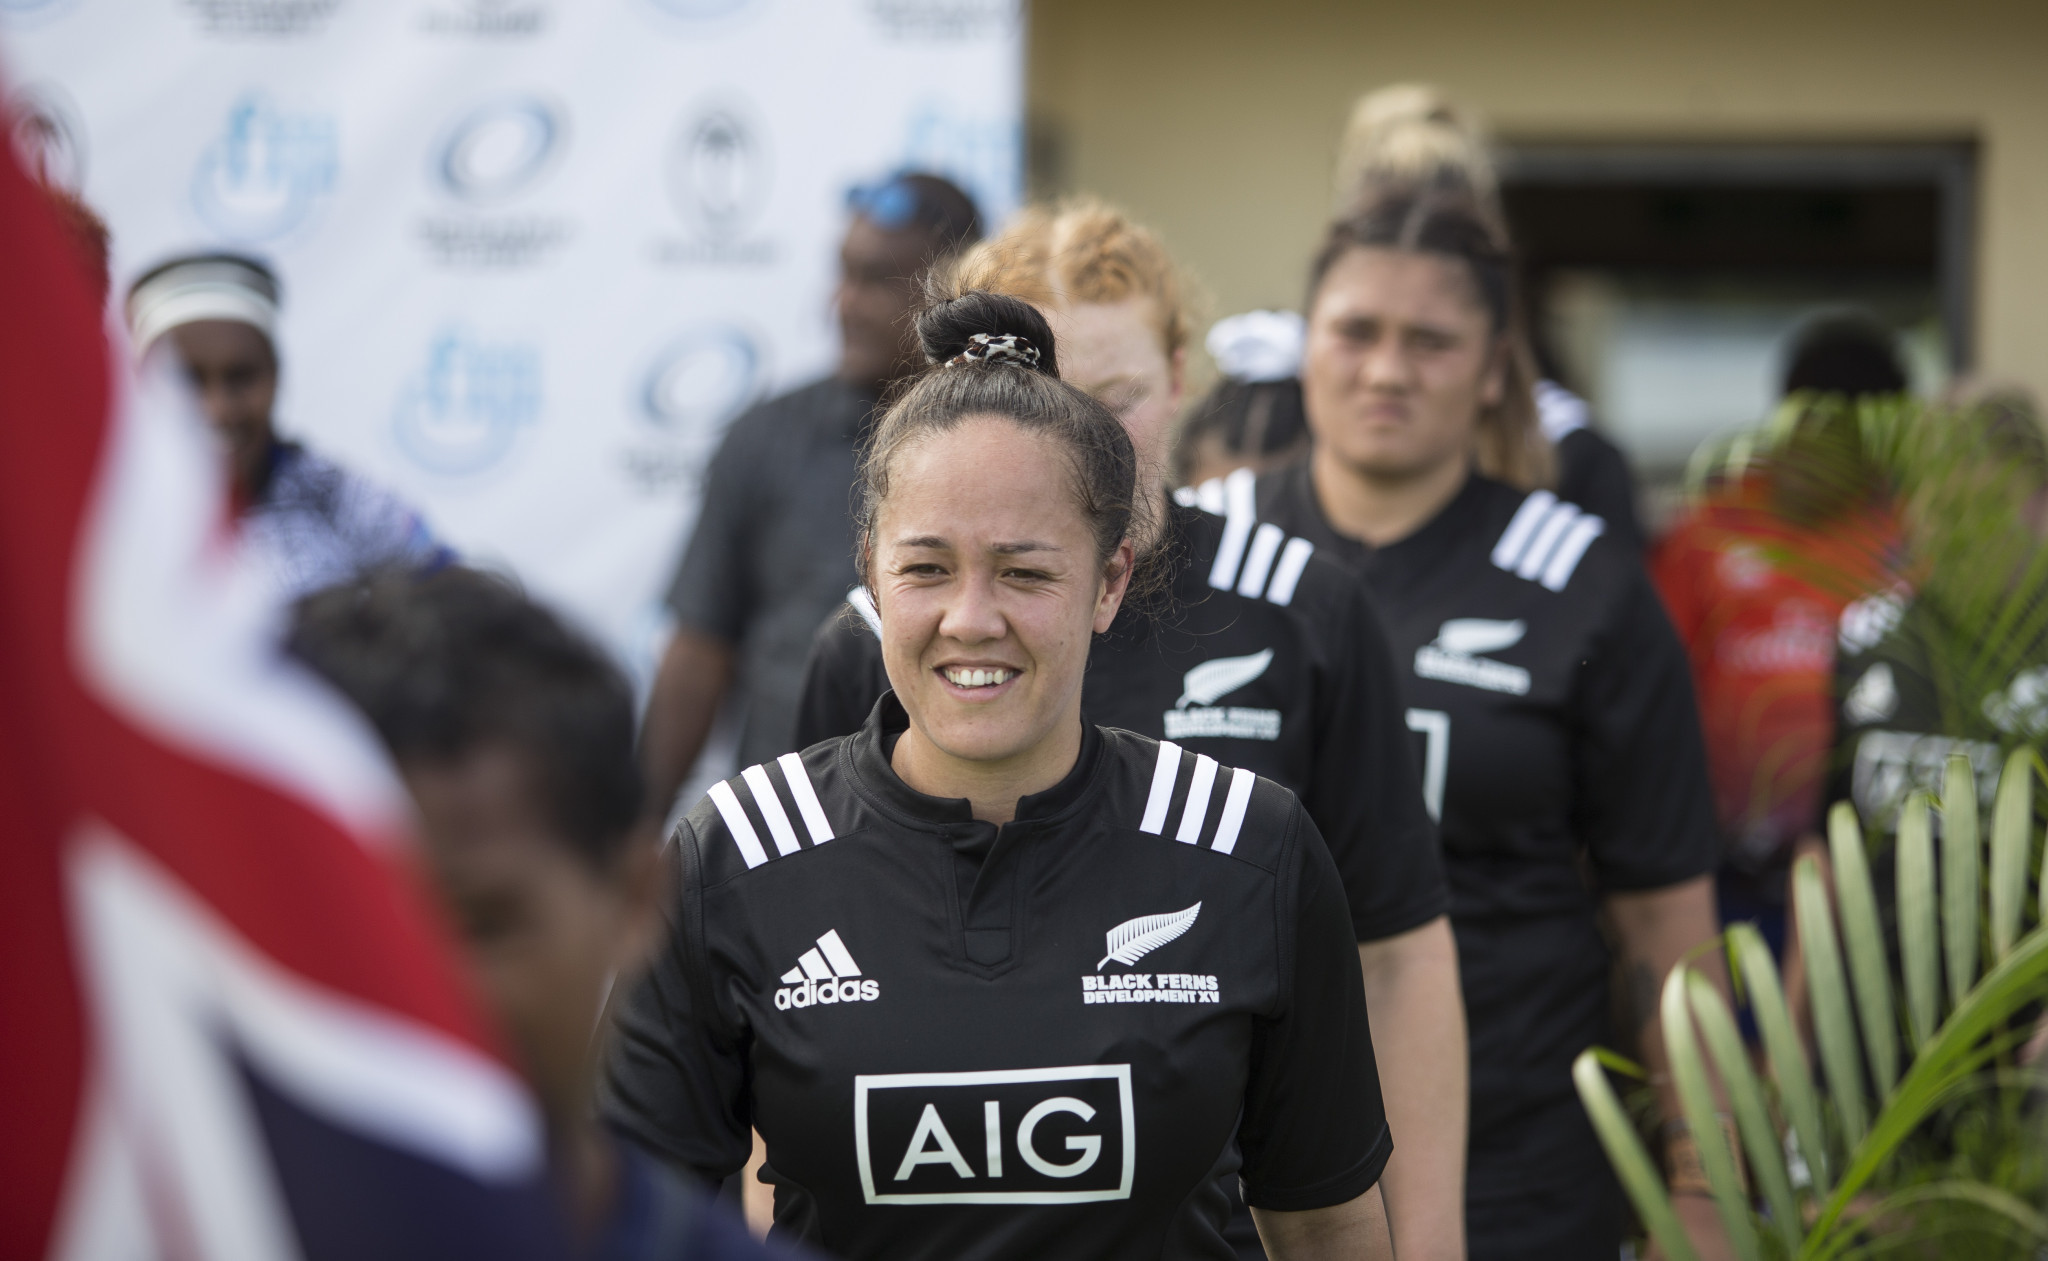 The Black Ferns were exempt from some of the cost cutting measures introduced by New Zealand Rugby during the pandemic ©Getty Images